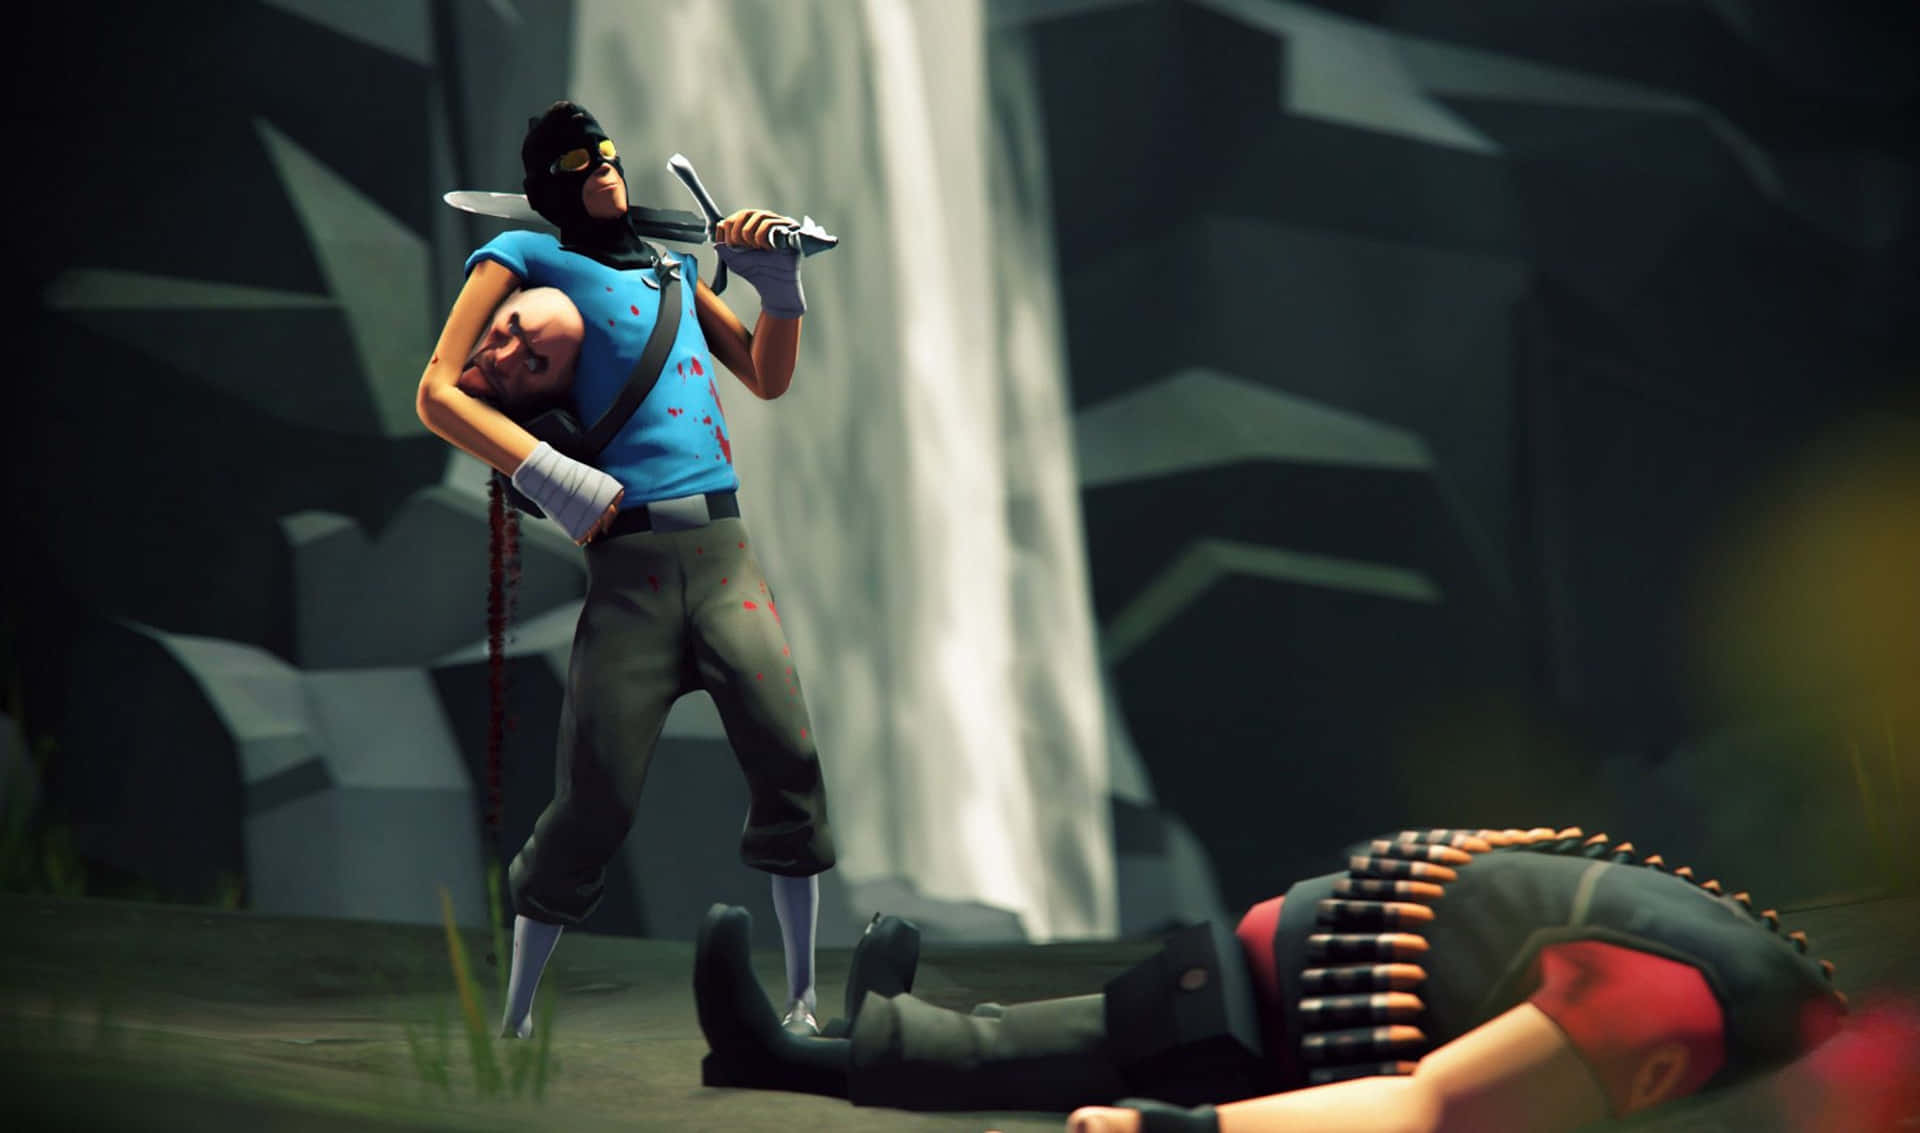 2440x1440 Team Fortress 2 Background 2440 X 1440